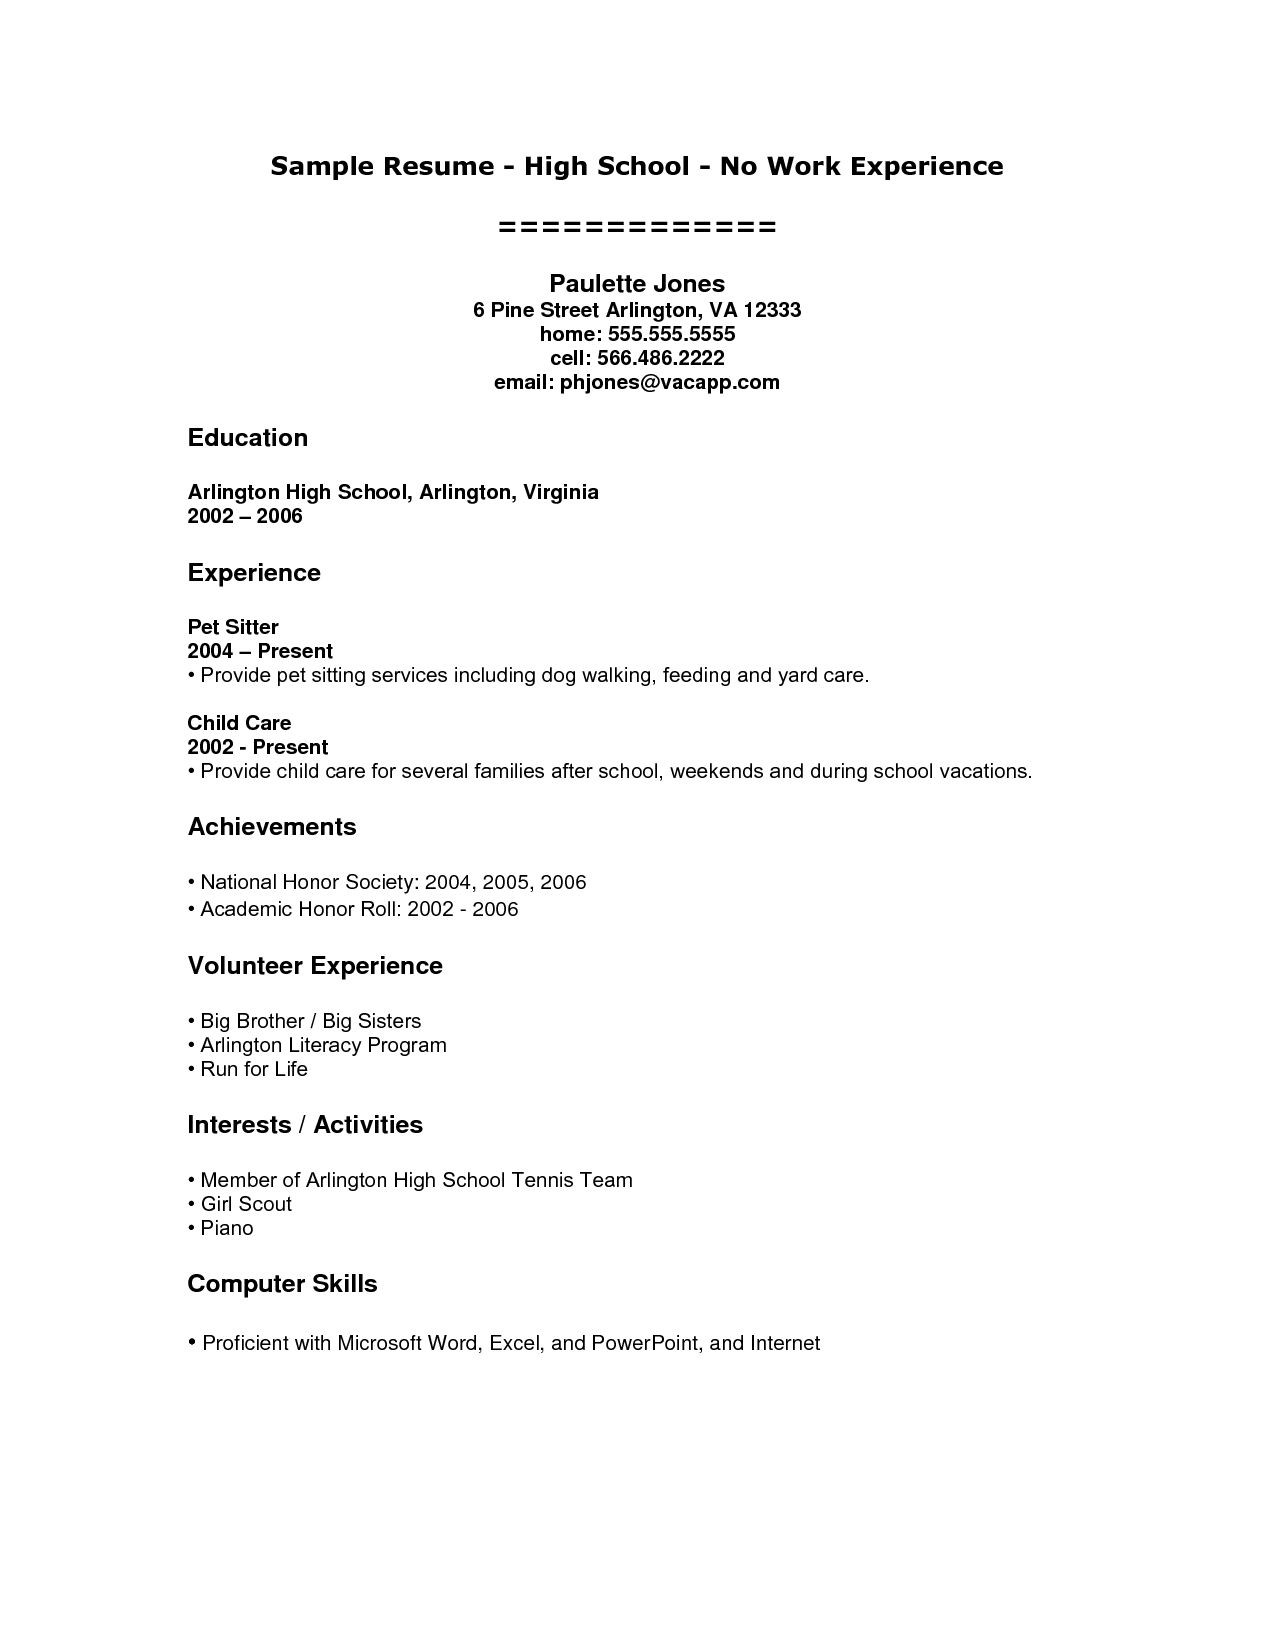 Resume Templates for Highschool Students with Little Experience Resume-examples.me Student Resume Template, High School Resume …